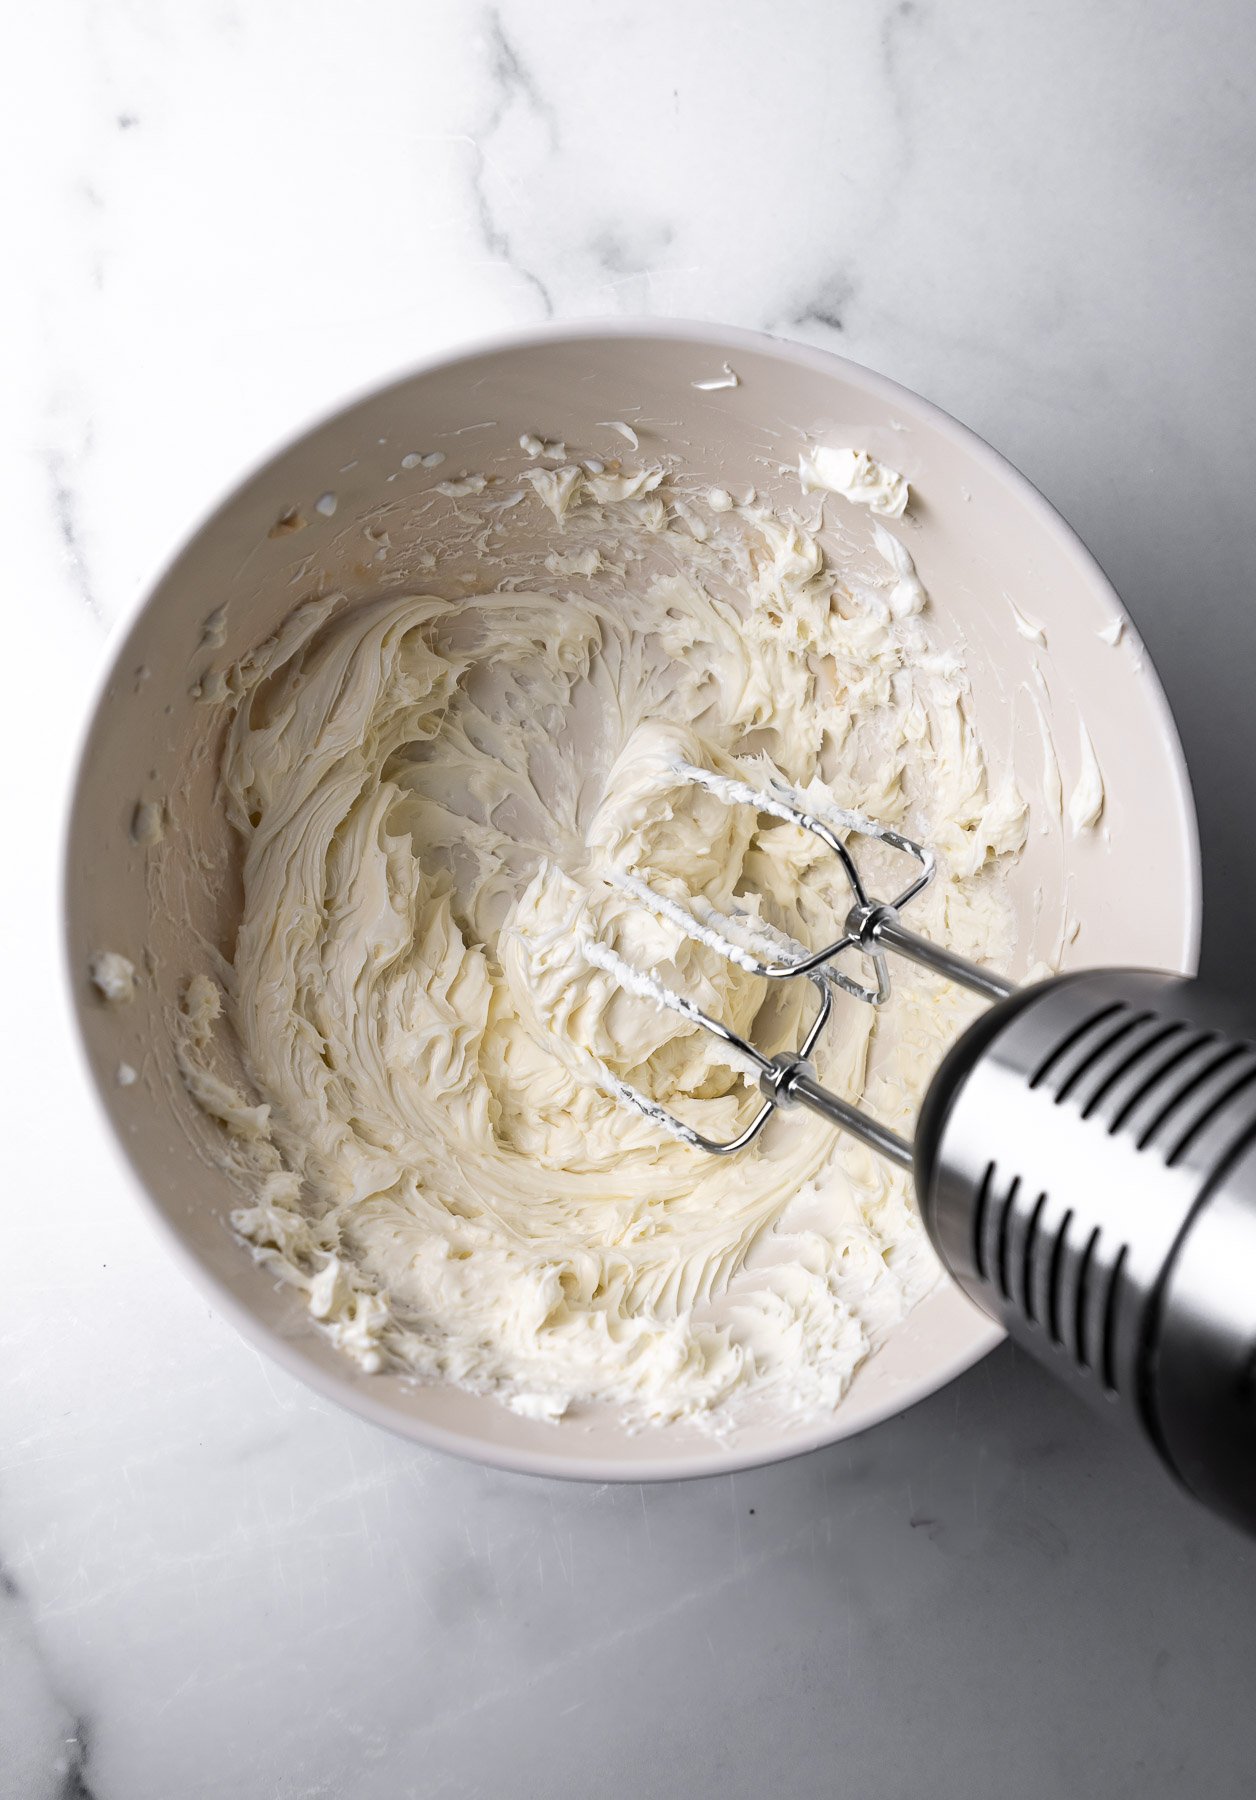 No Bake Cheesecake Filling being mixed with a handheld mixer in a bowl